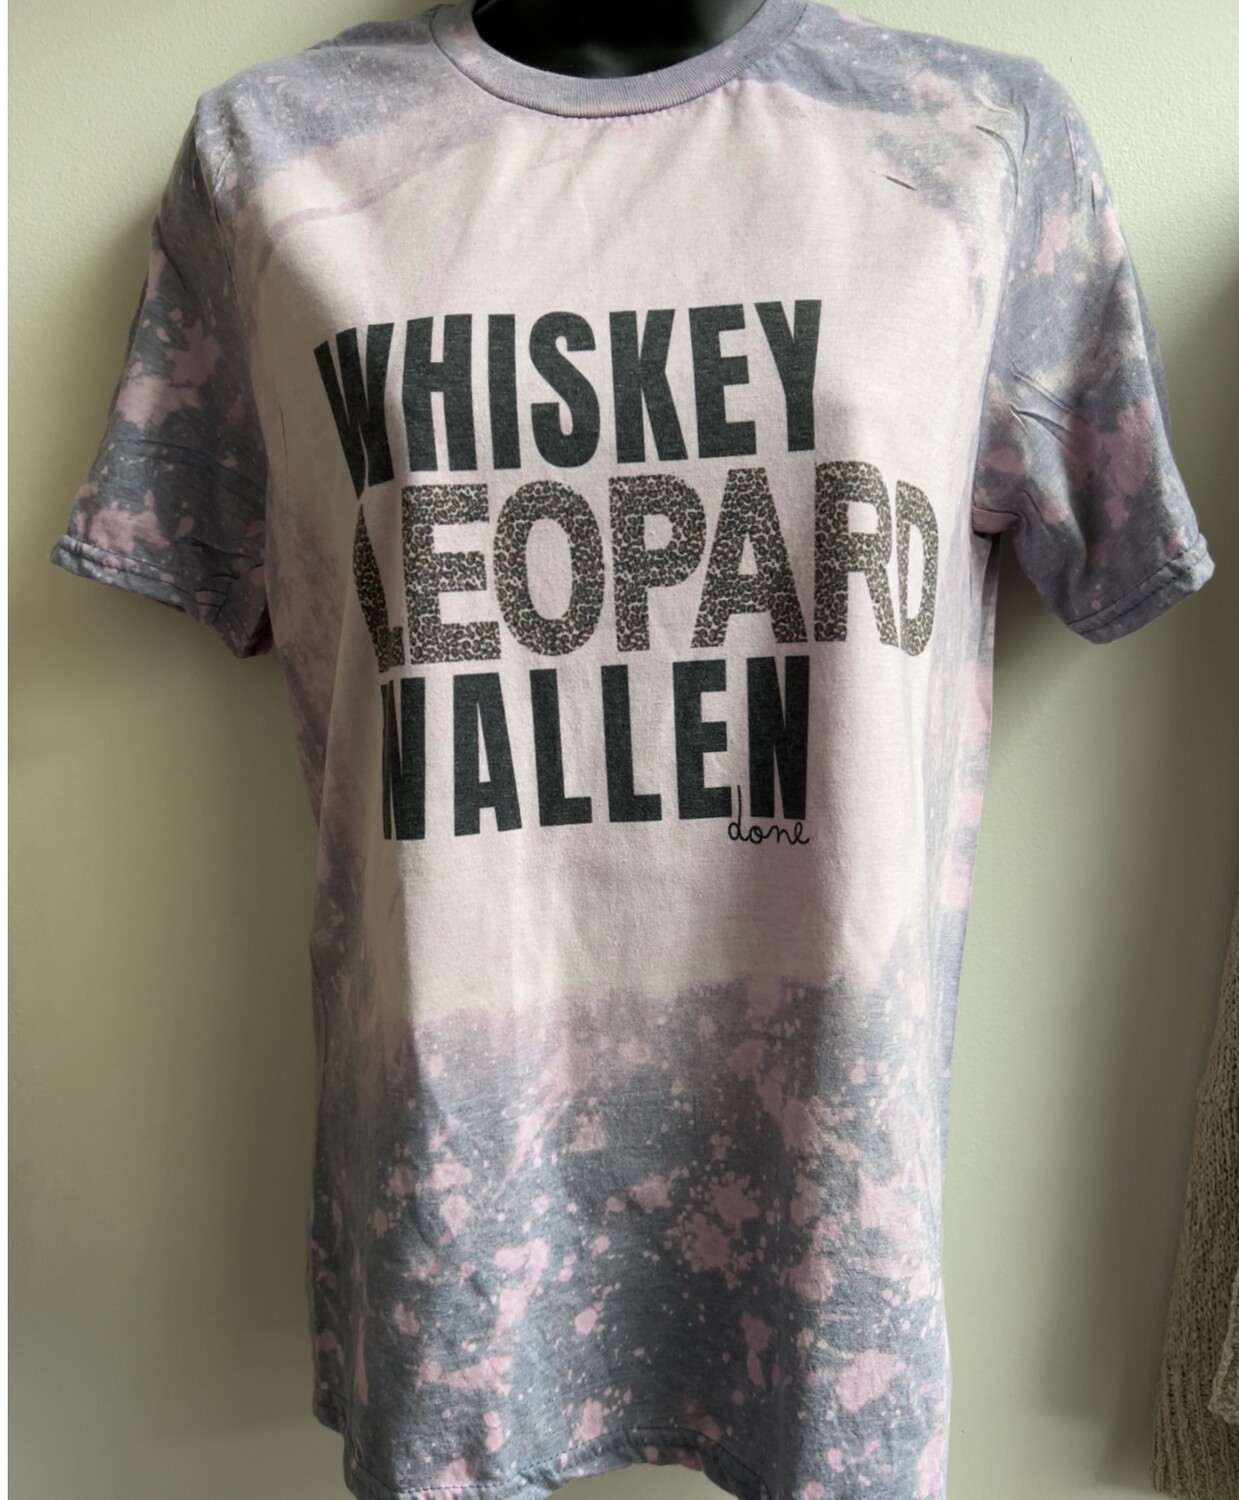 Whiskey Leopard and Wallen